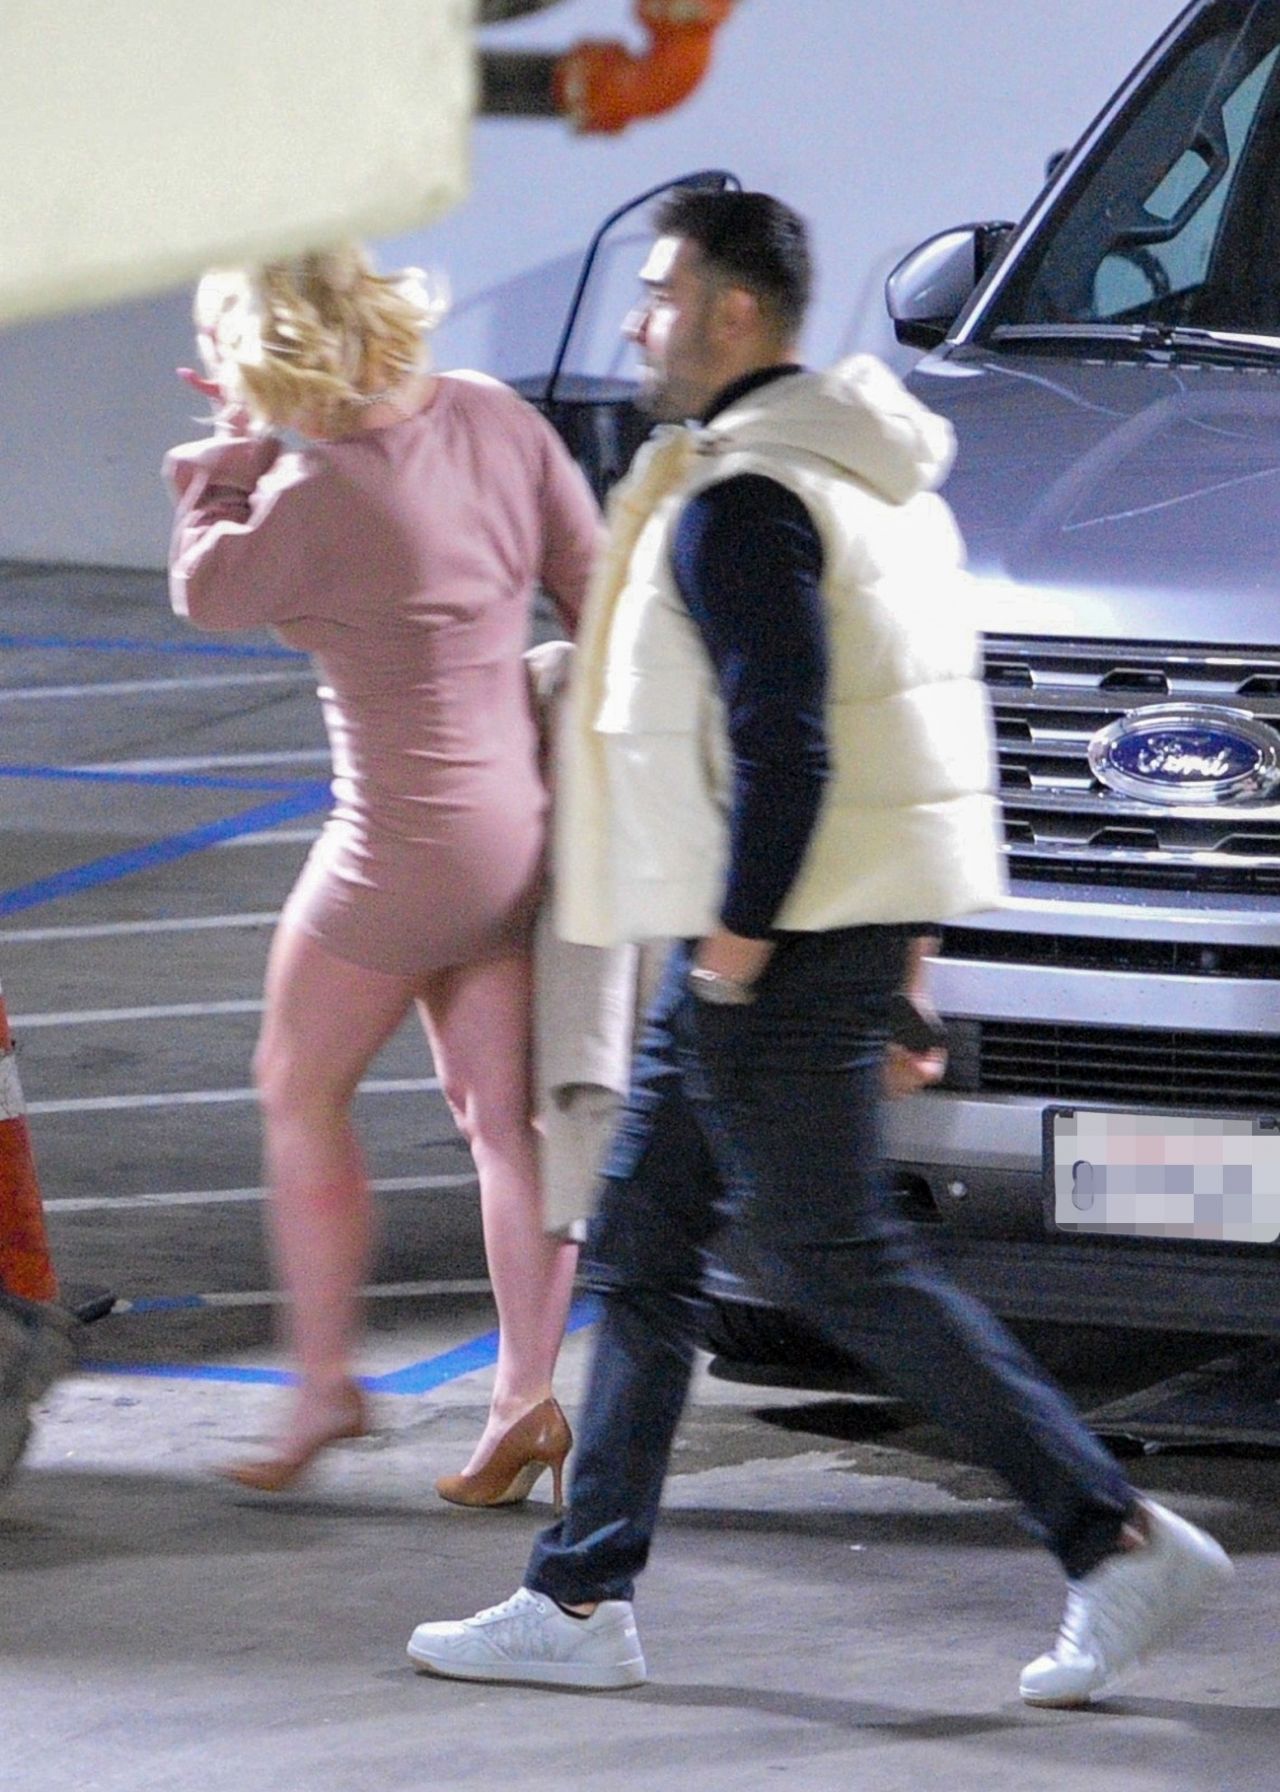 https://celebmafia.com/wp-content/uploads/2021/12/britney-spears-in-a-mini-dress-and-heels-at-catch-la-in-hollywood-12-27-2021-1.jpg